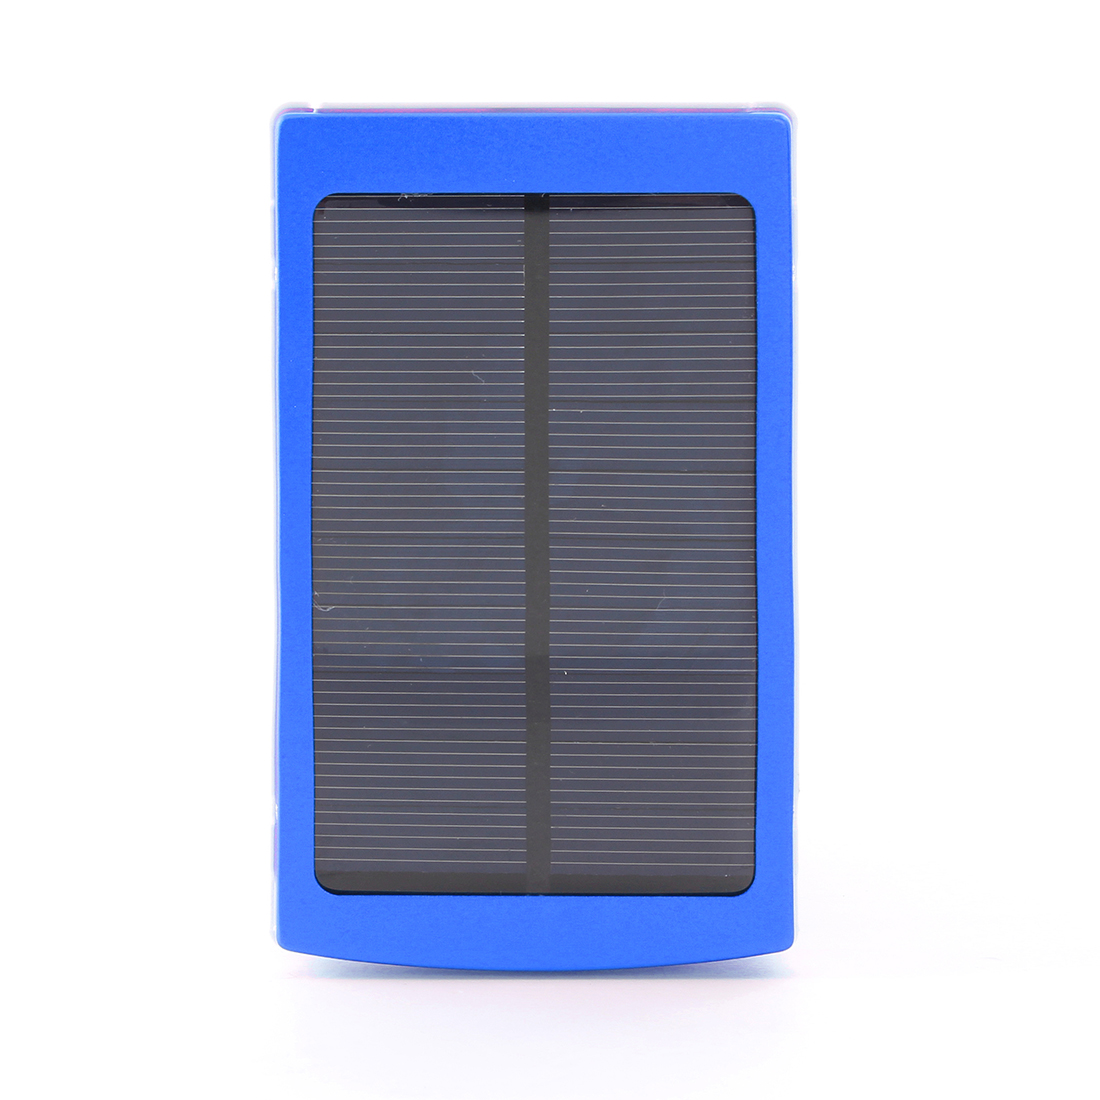 Solar-Charger-Mobile-Phone-Cell-Phone-Power-Bank-Charger-for-Camping-Hiking-Travel-955194-10